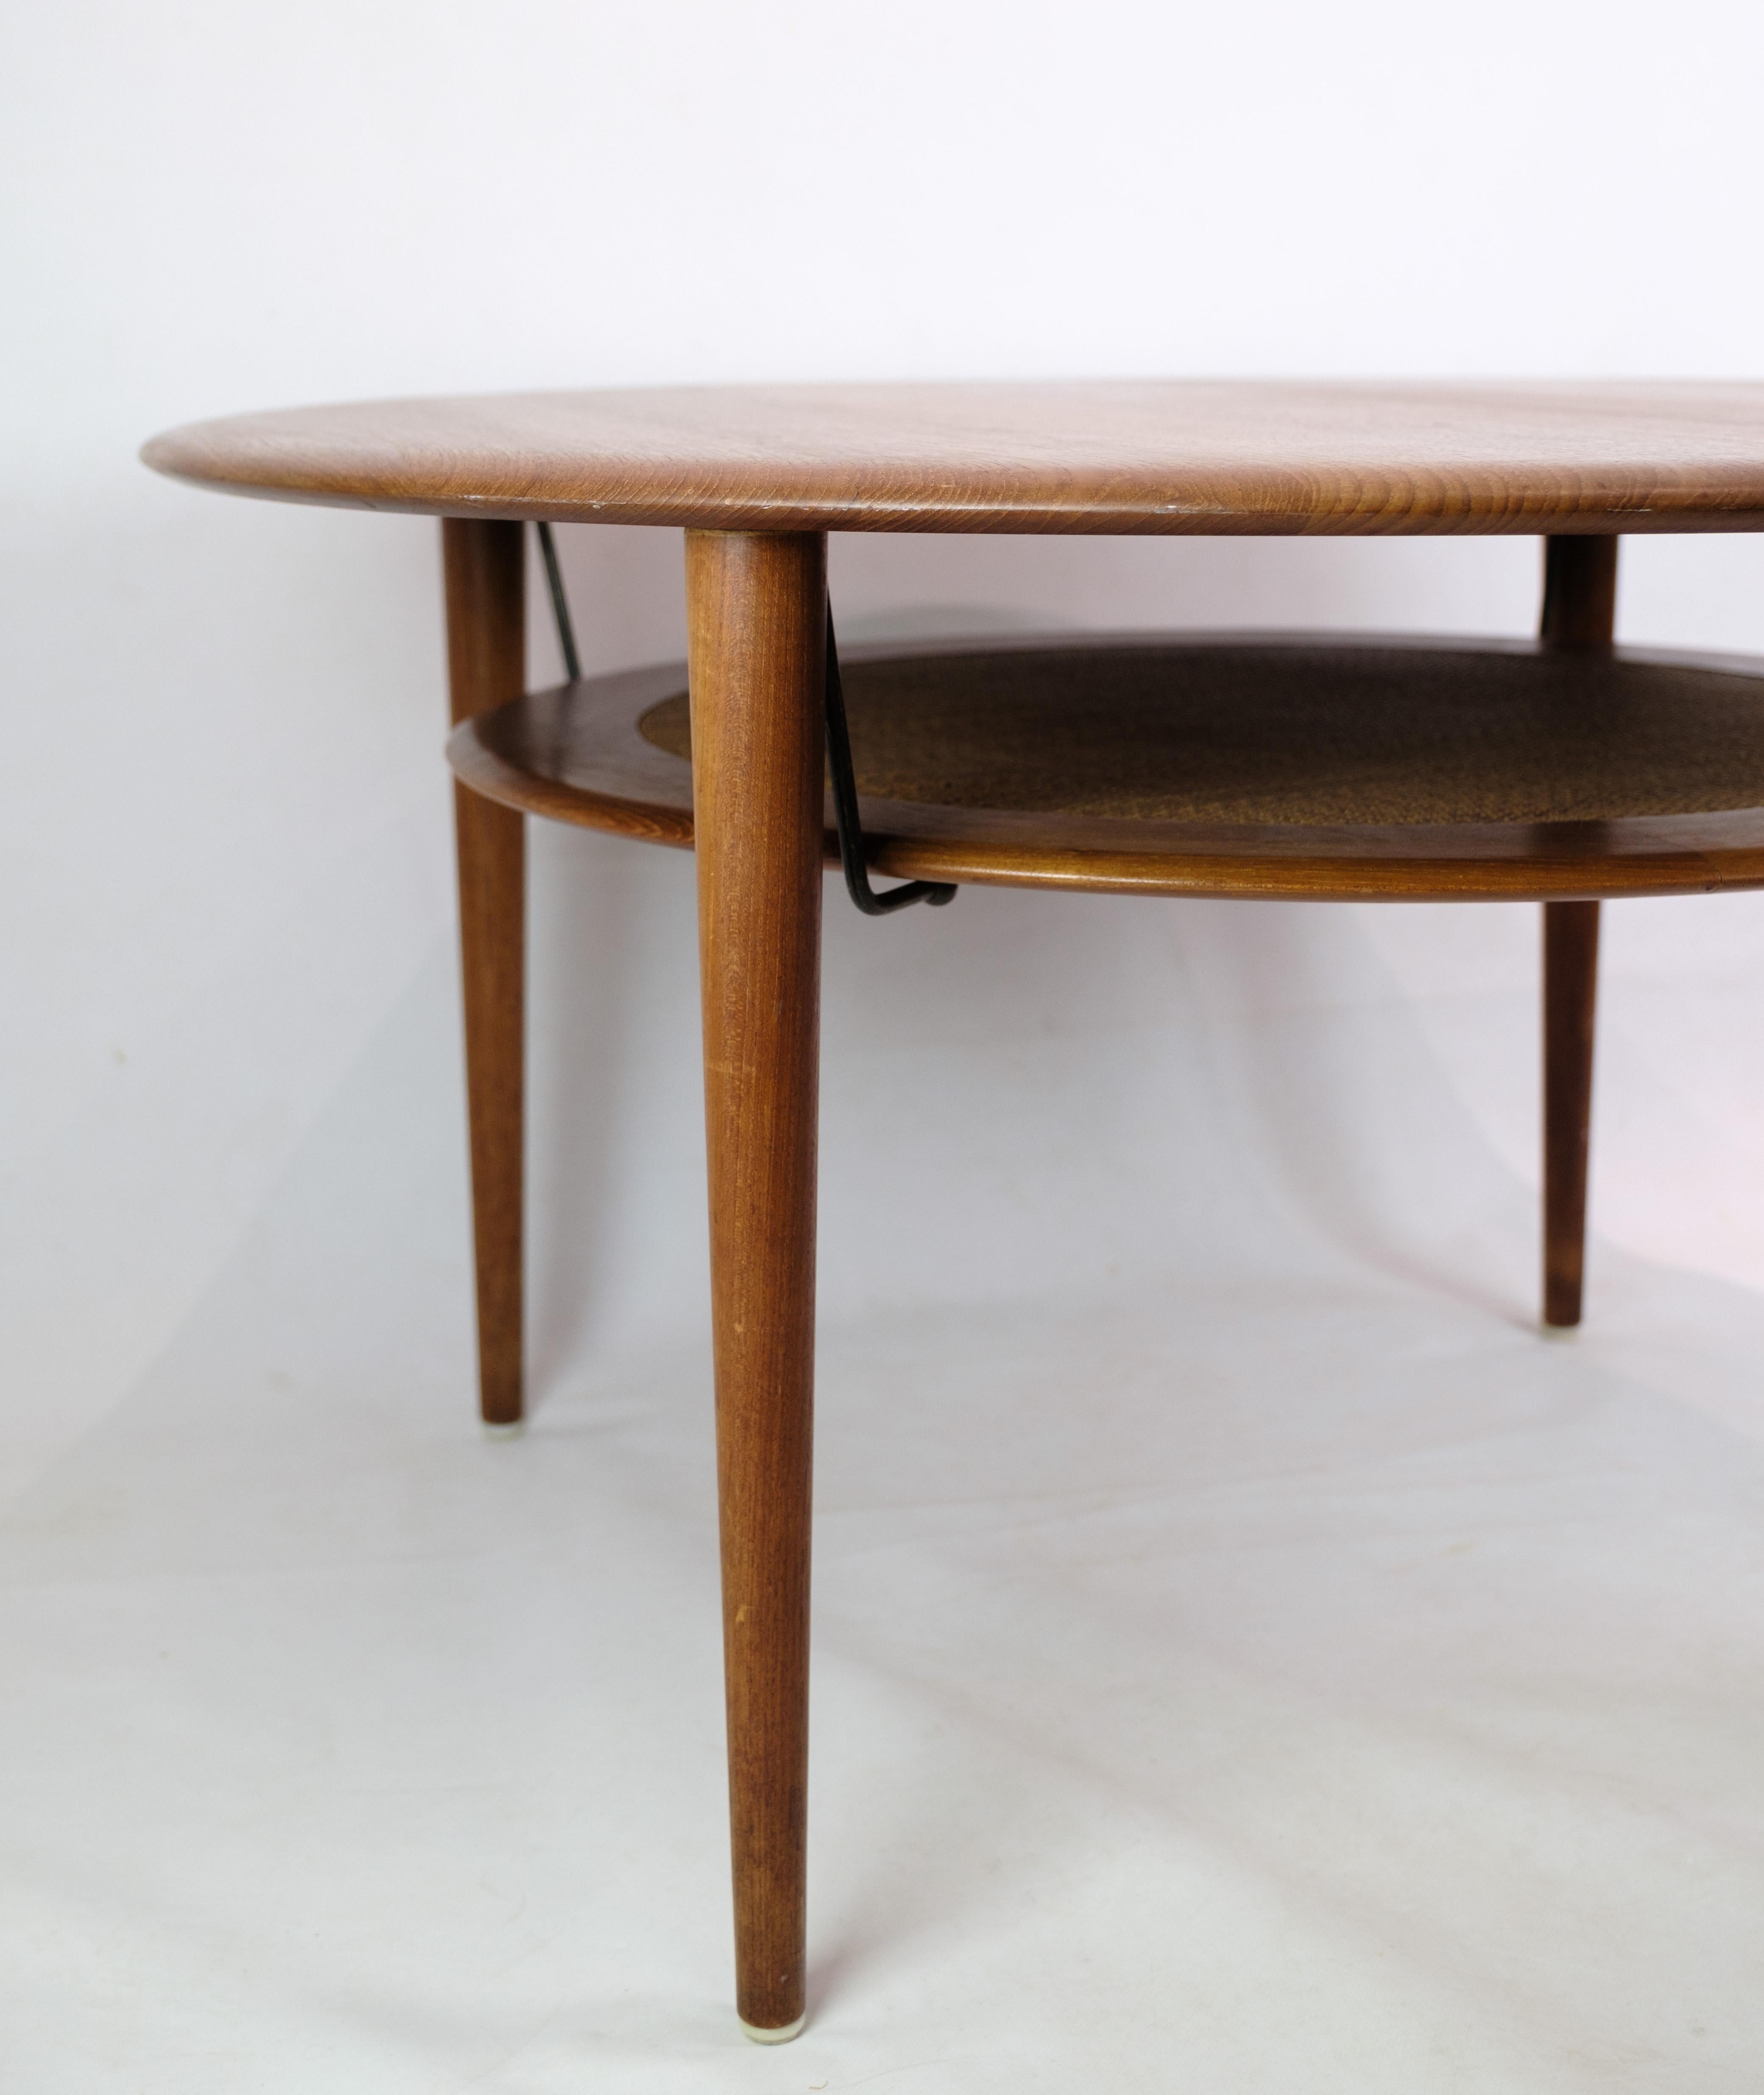 Coffee table, model FD 515, designed by Peter Hvidt 1916-1986 & Orla Mølgaard-Nielsen 1907-1993 made in teak wood from 1956. The coffee table is fitted with a wicker newspaper shelf and brass fittings. Made by the manufacturer France. 